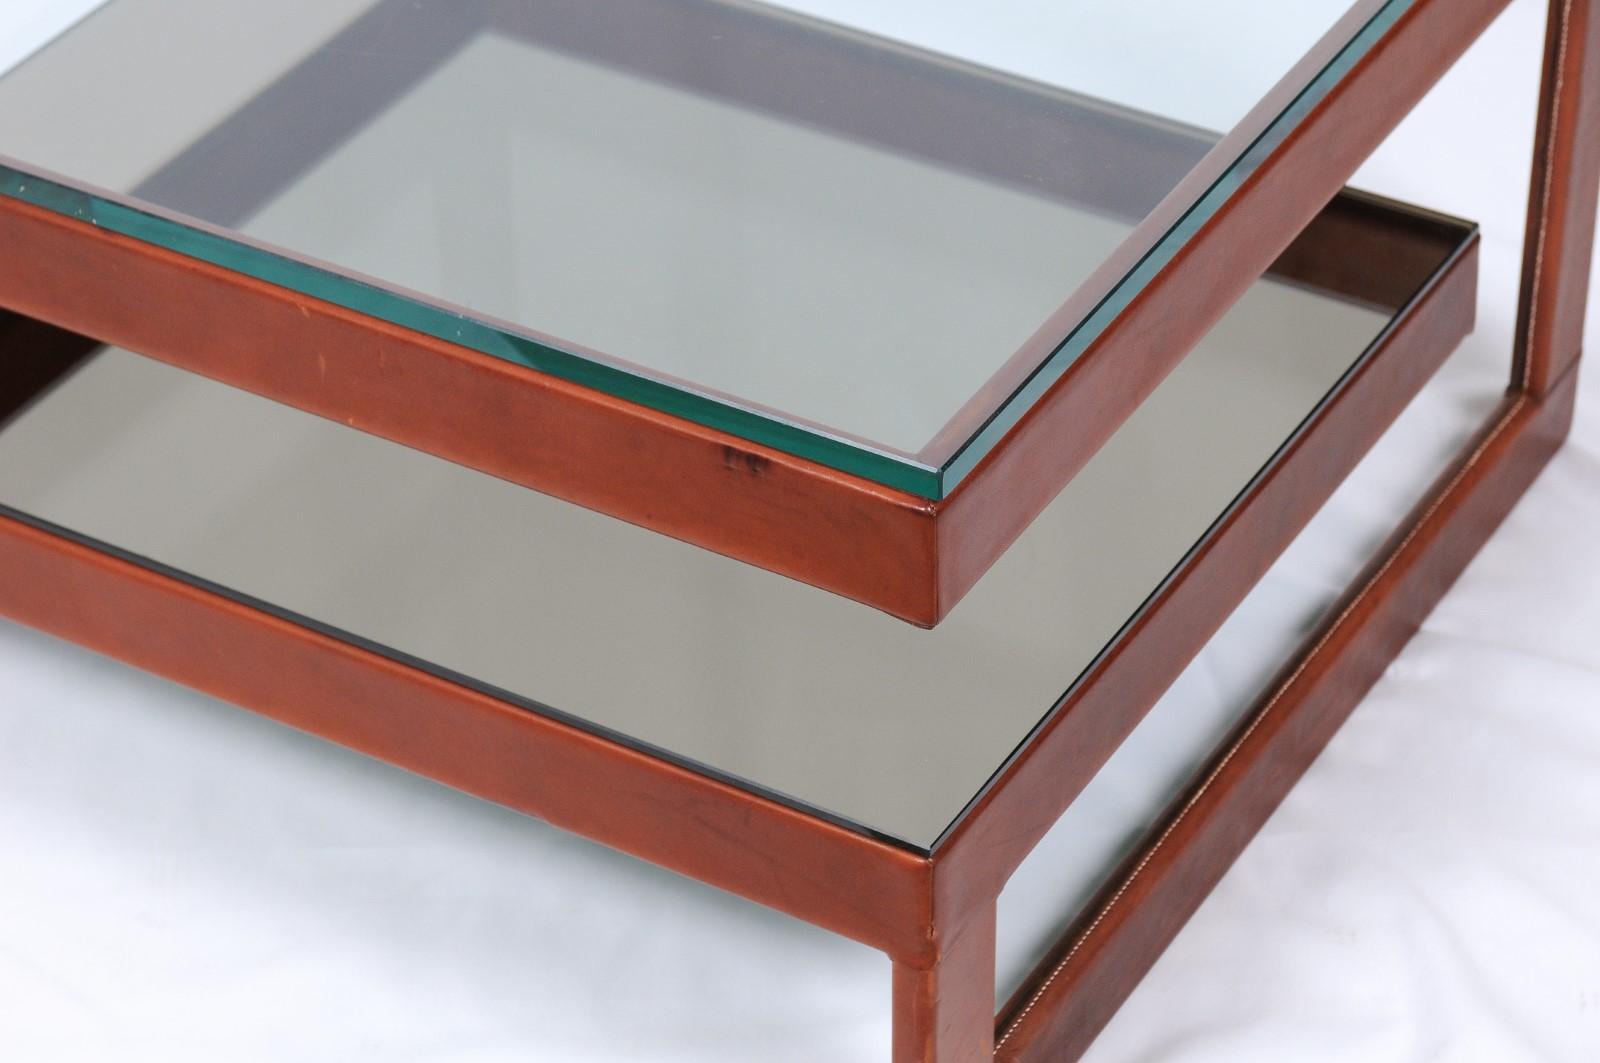 20th Century Modern Glass and Leather Coffee Table